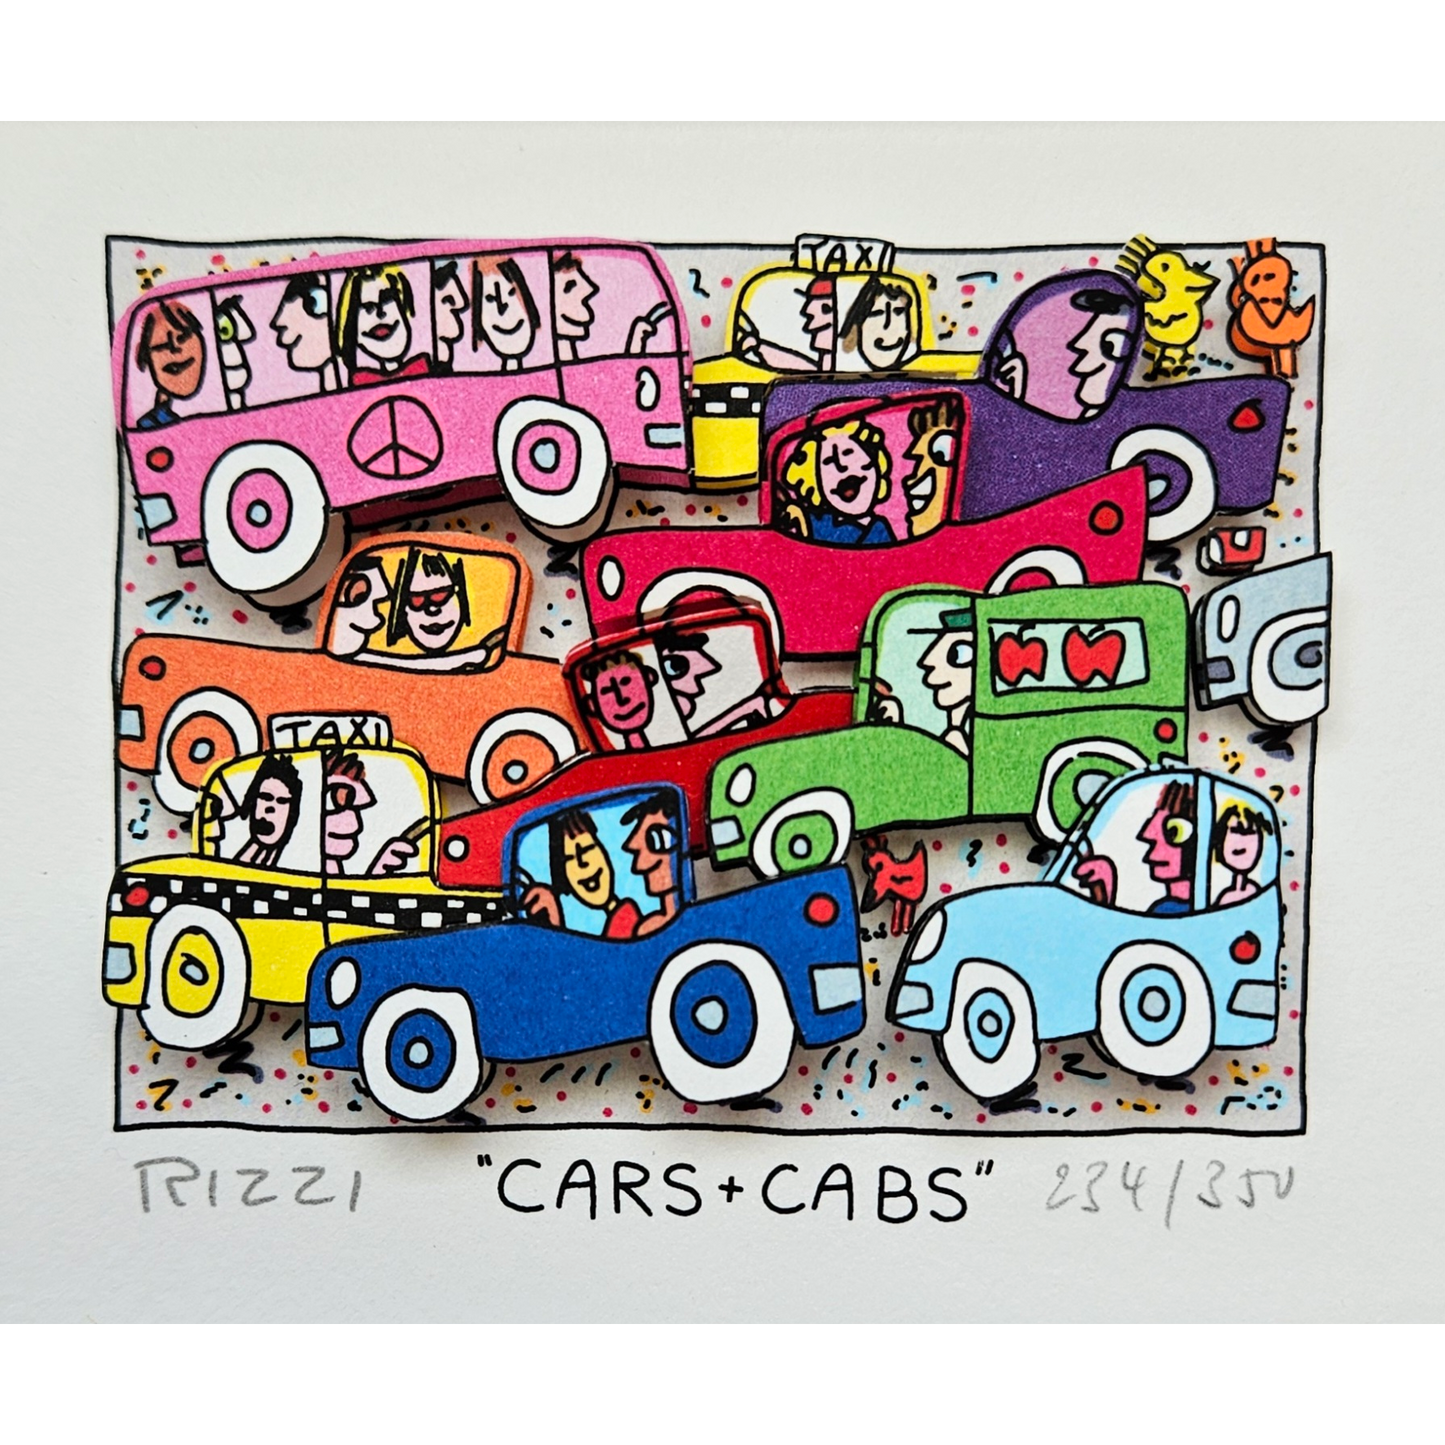 James Rizzi - Cars + Cabs (2013)